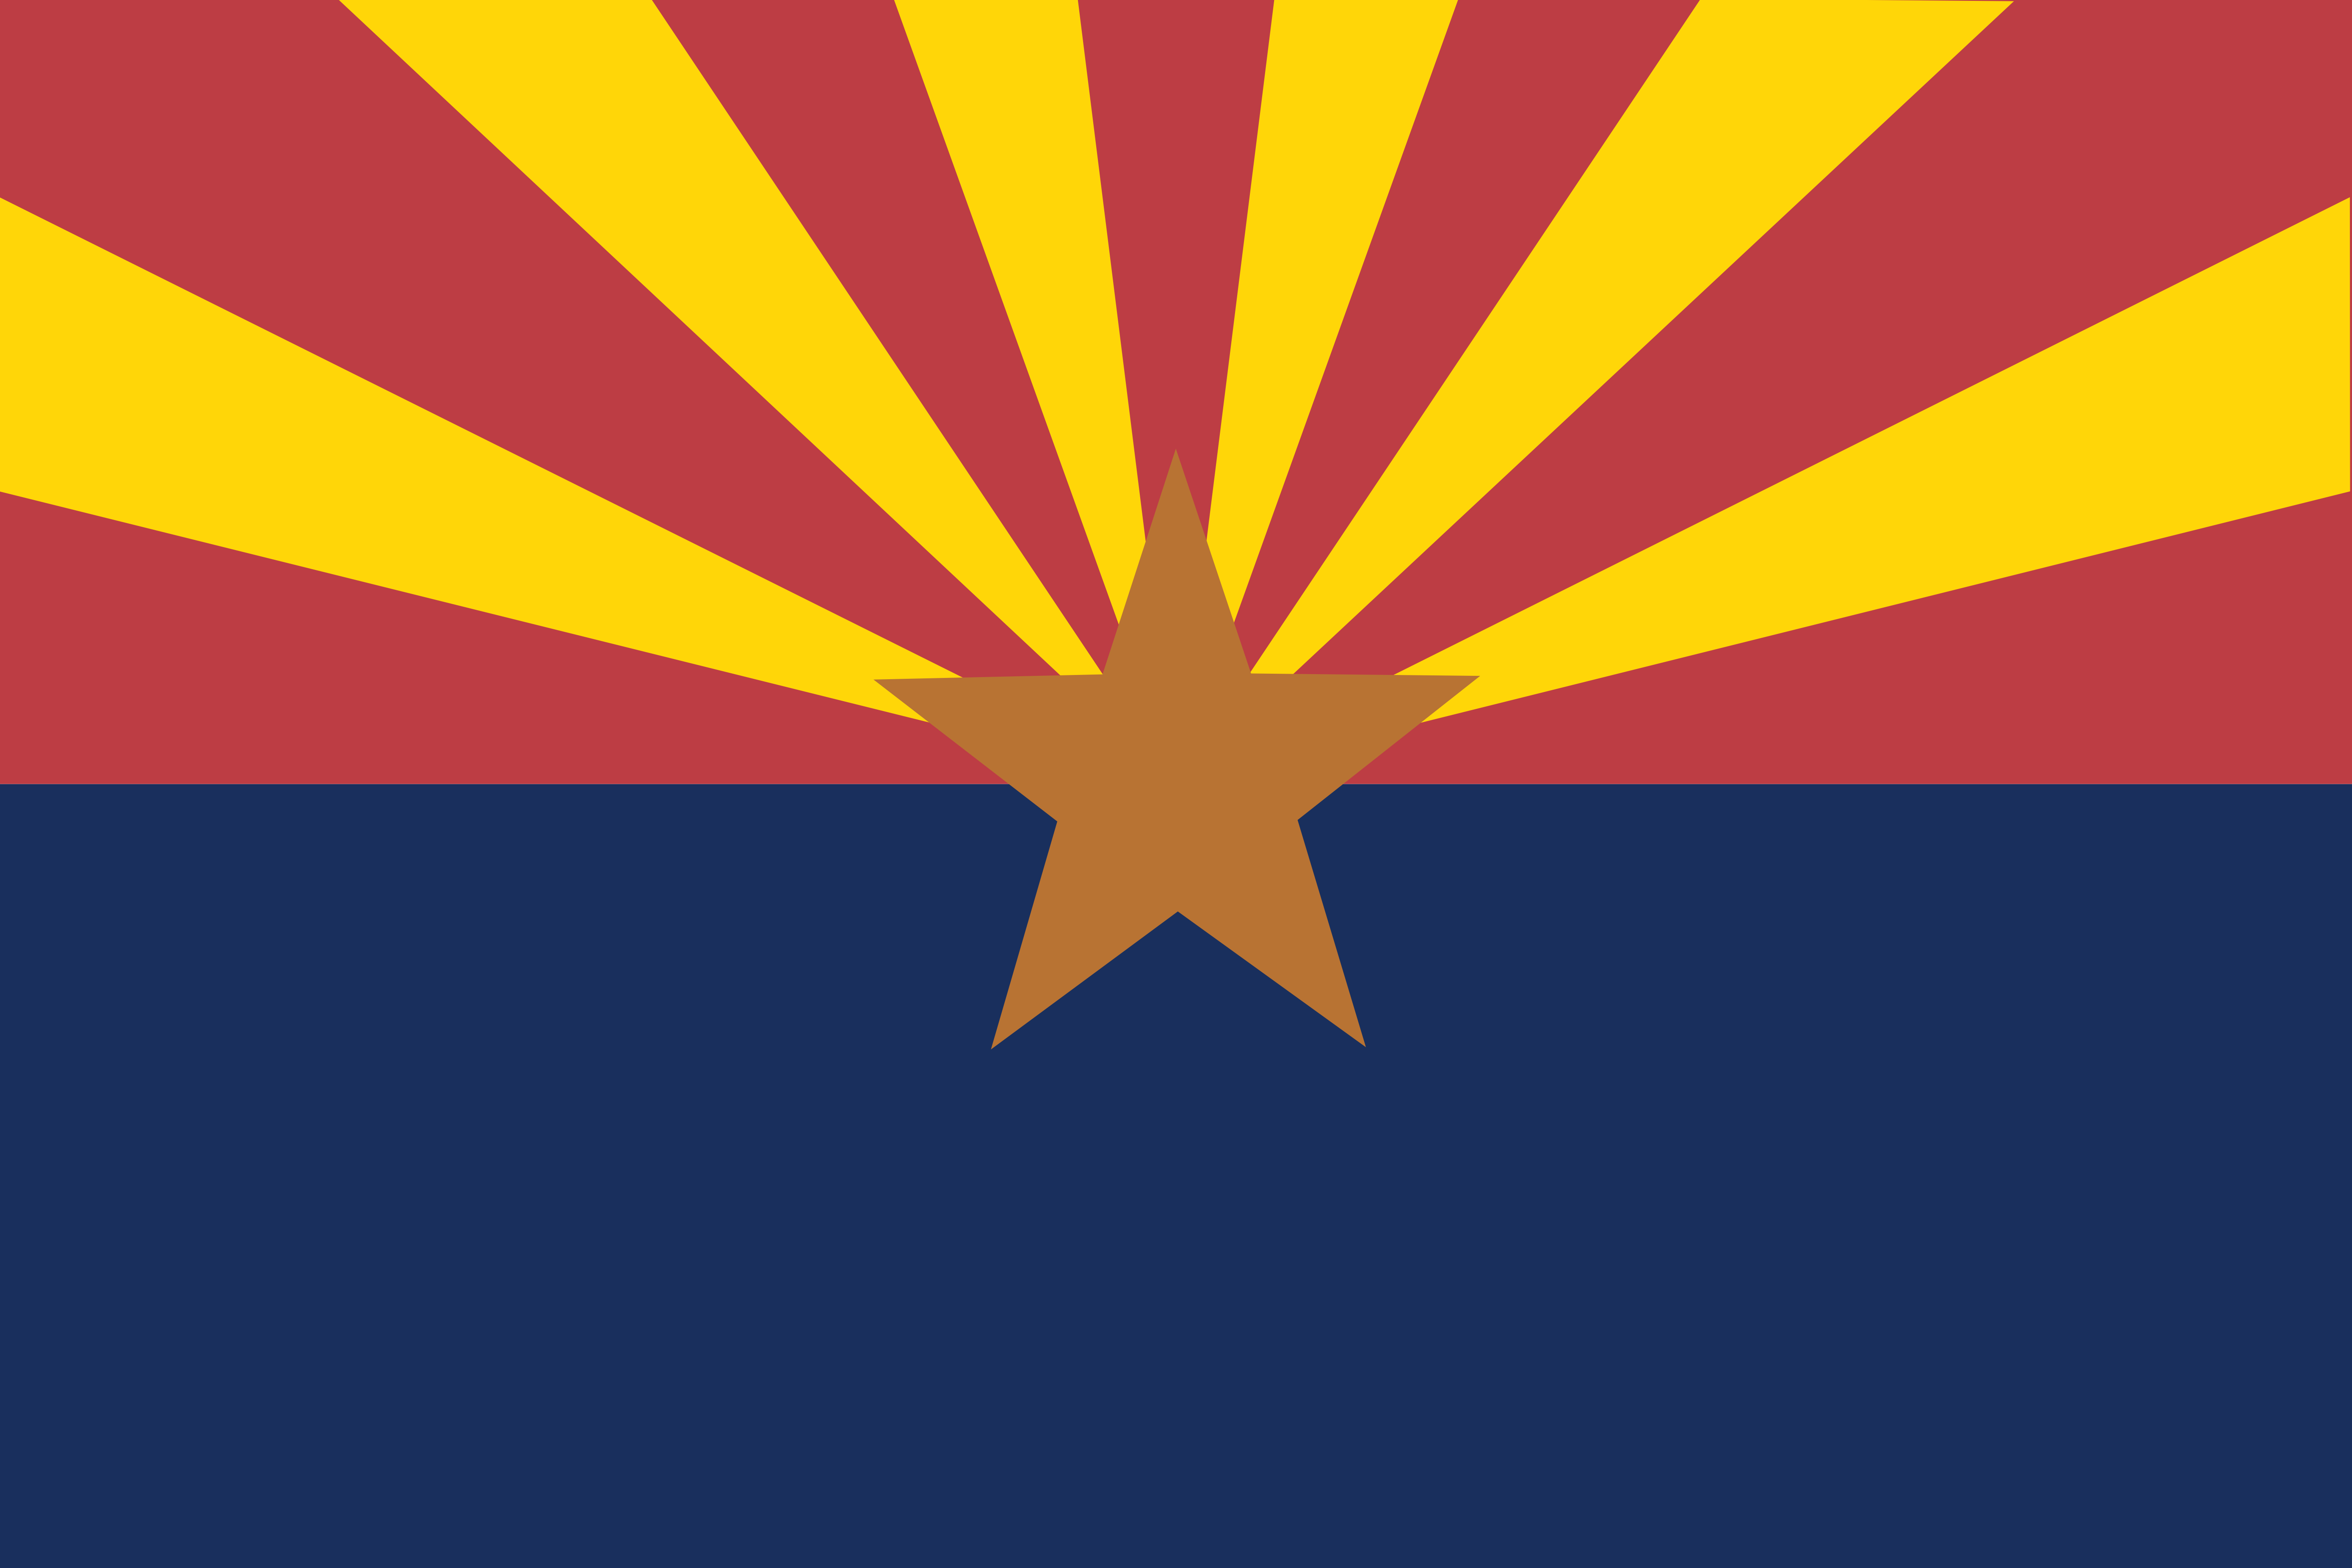 Usa Arizona Flag Flags of the World openclipart.org commons 